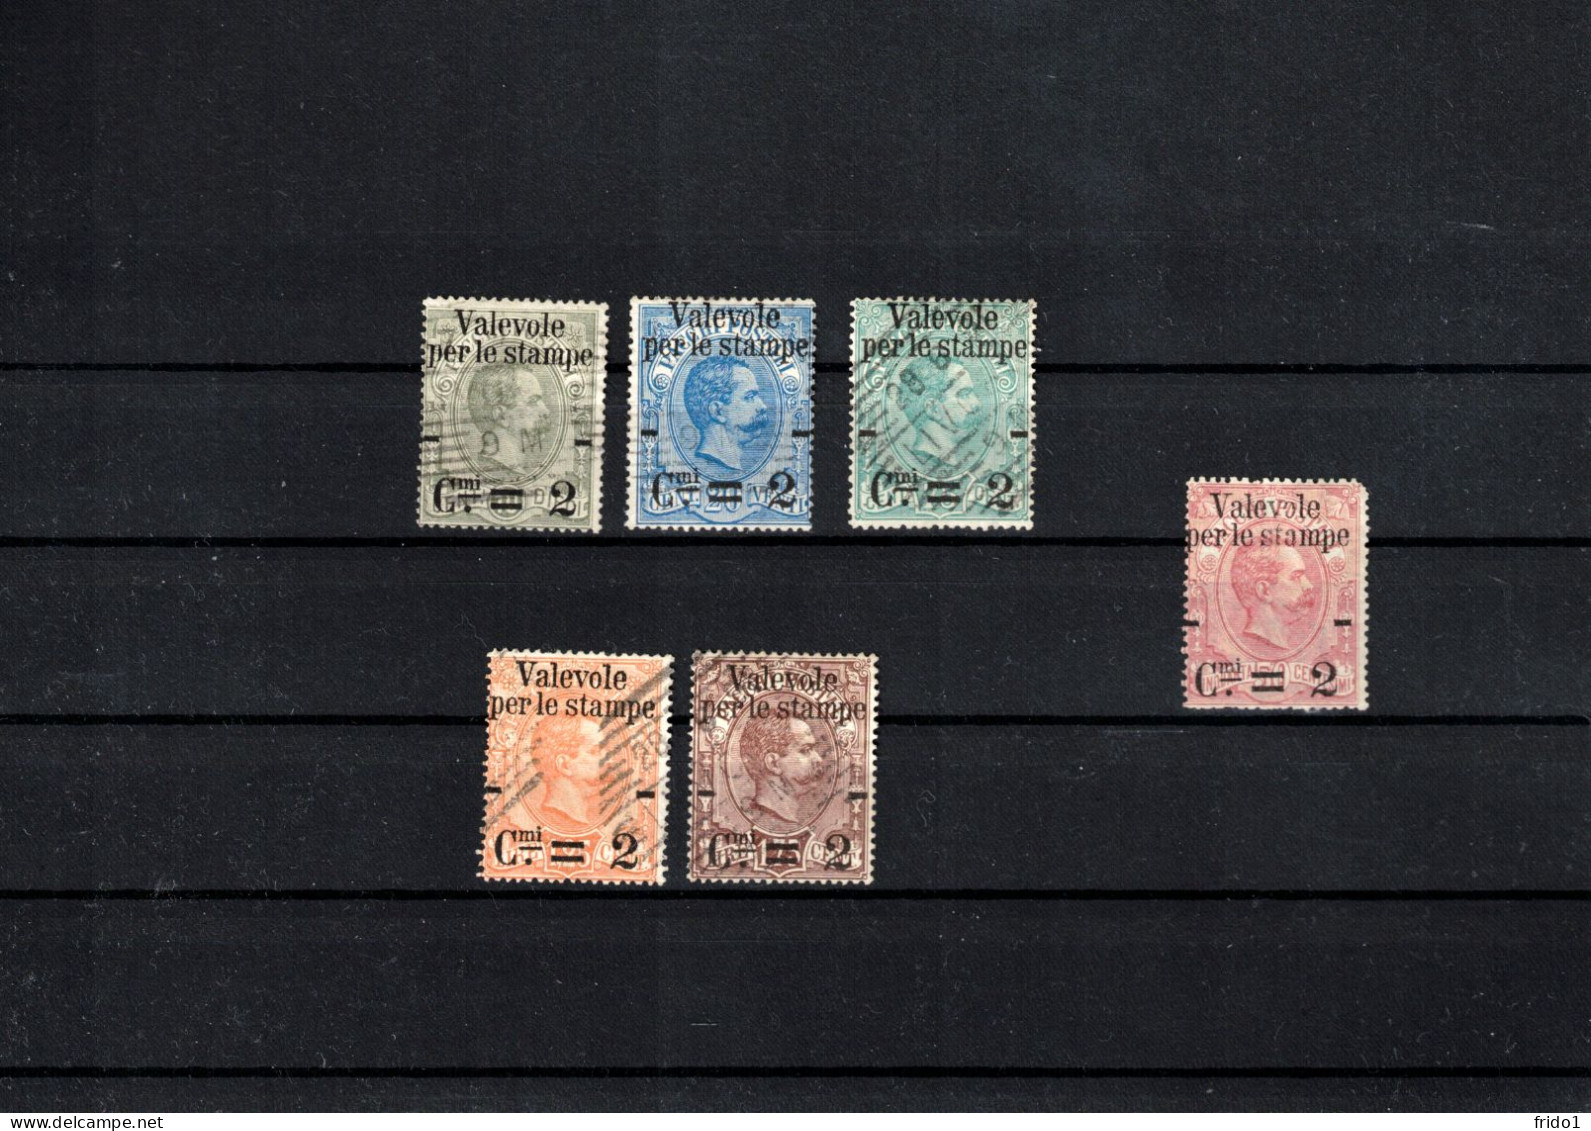 Italy / Italia 1890 Packet Stamps Overprinted For The Use As Press Stamps Fine Used - 50c Overprint Just As Sample - Used